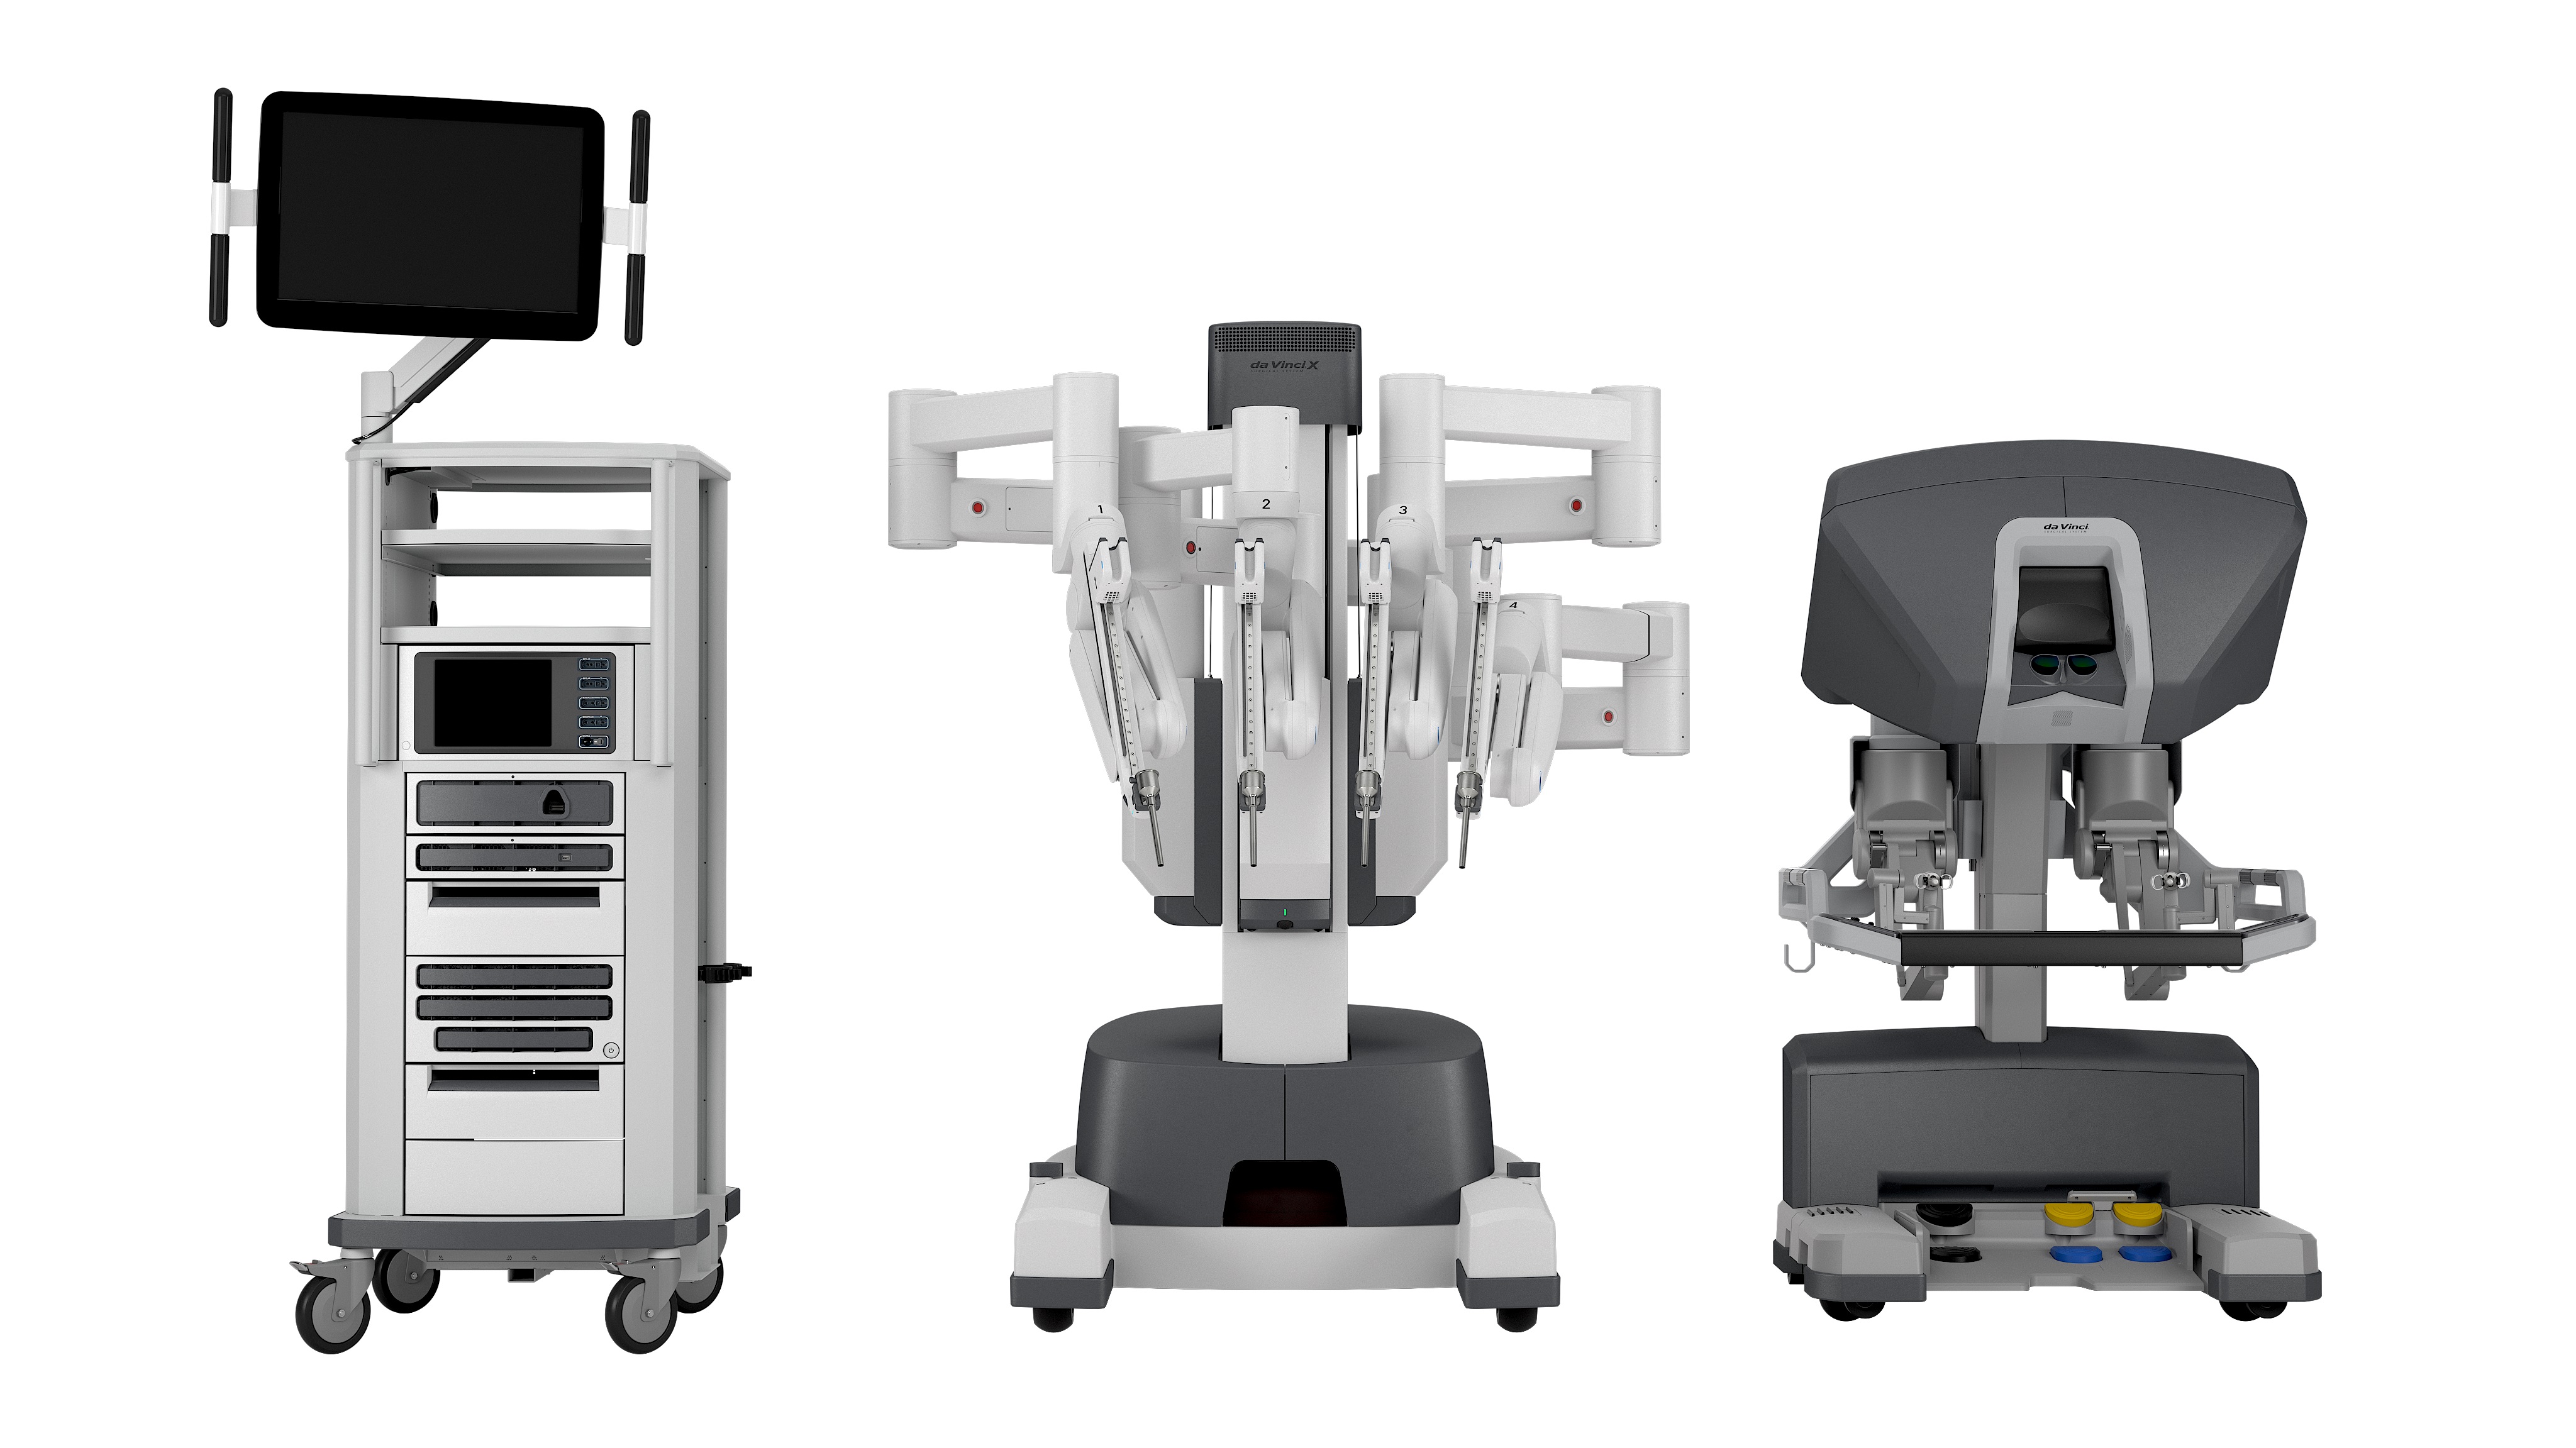 New da Vinci X Surgical System provides lower-cost option for hospitals